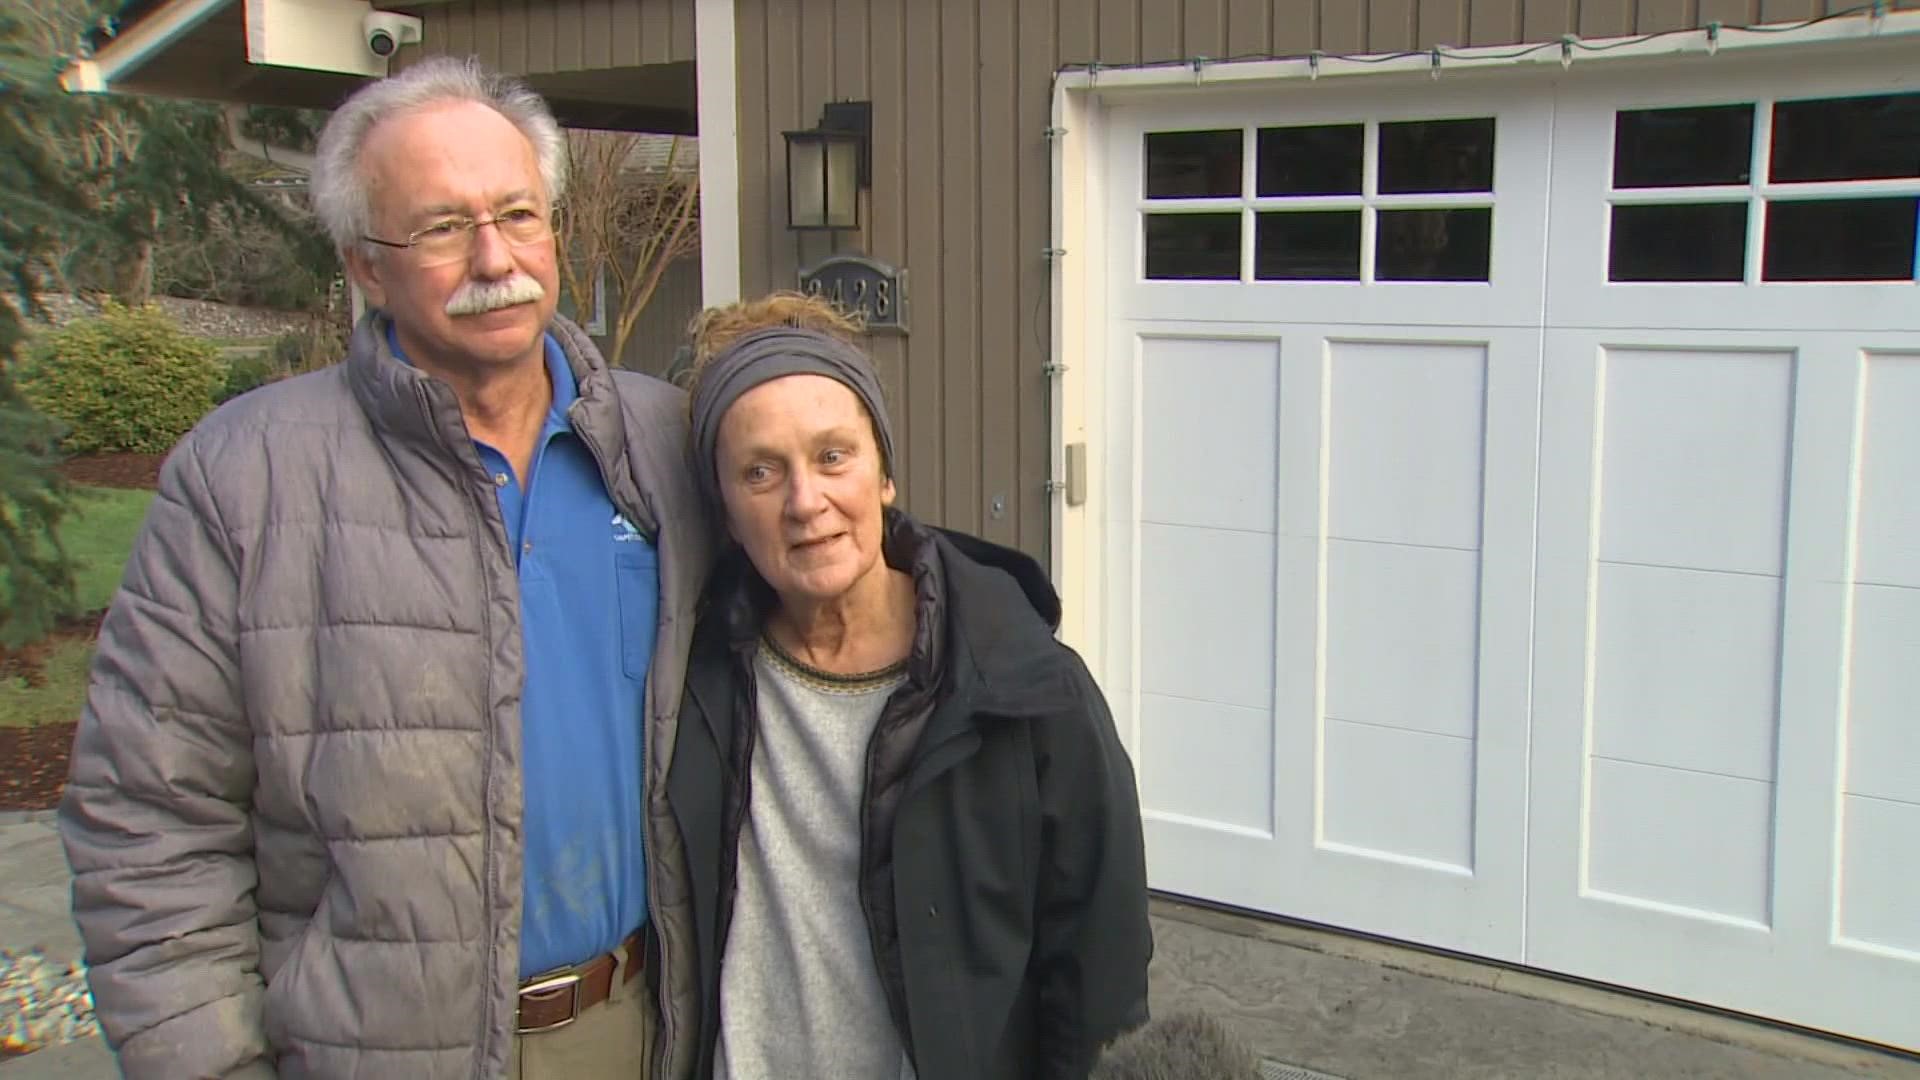 John and Barb Surdi have lived in their Bellevue home for more than 30 years. Monday, a landslide sent it crumbling under them.